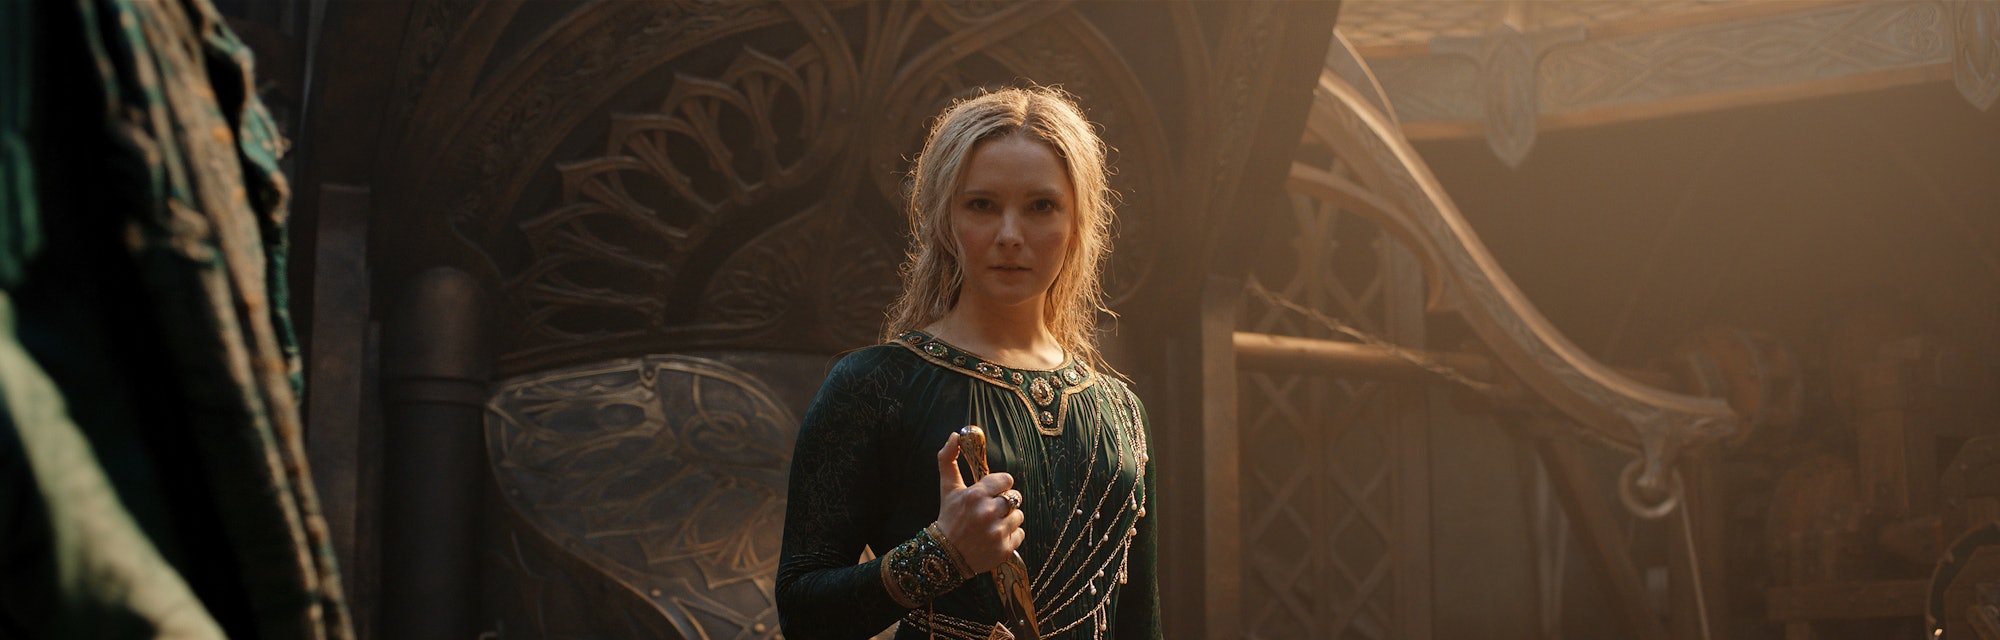 Galadriel (Morfydd Clark) holds her dagger in the Season 1 finale of The Lord of the Rings: The Ring...